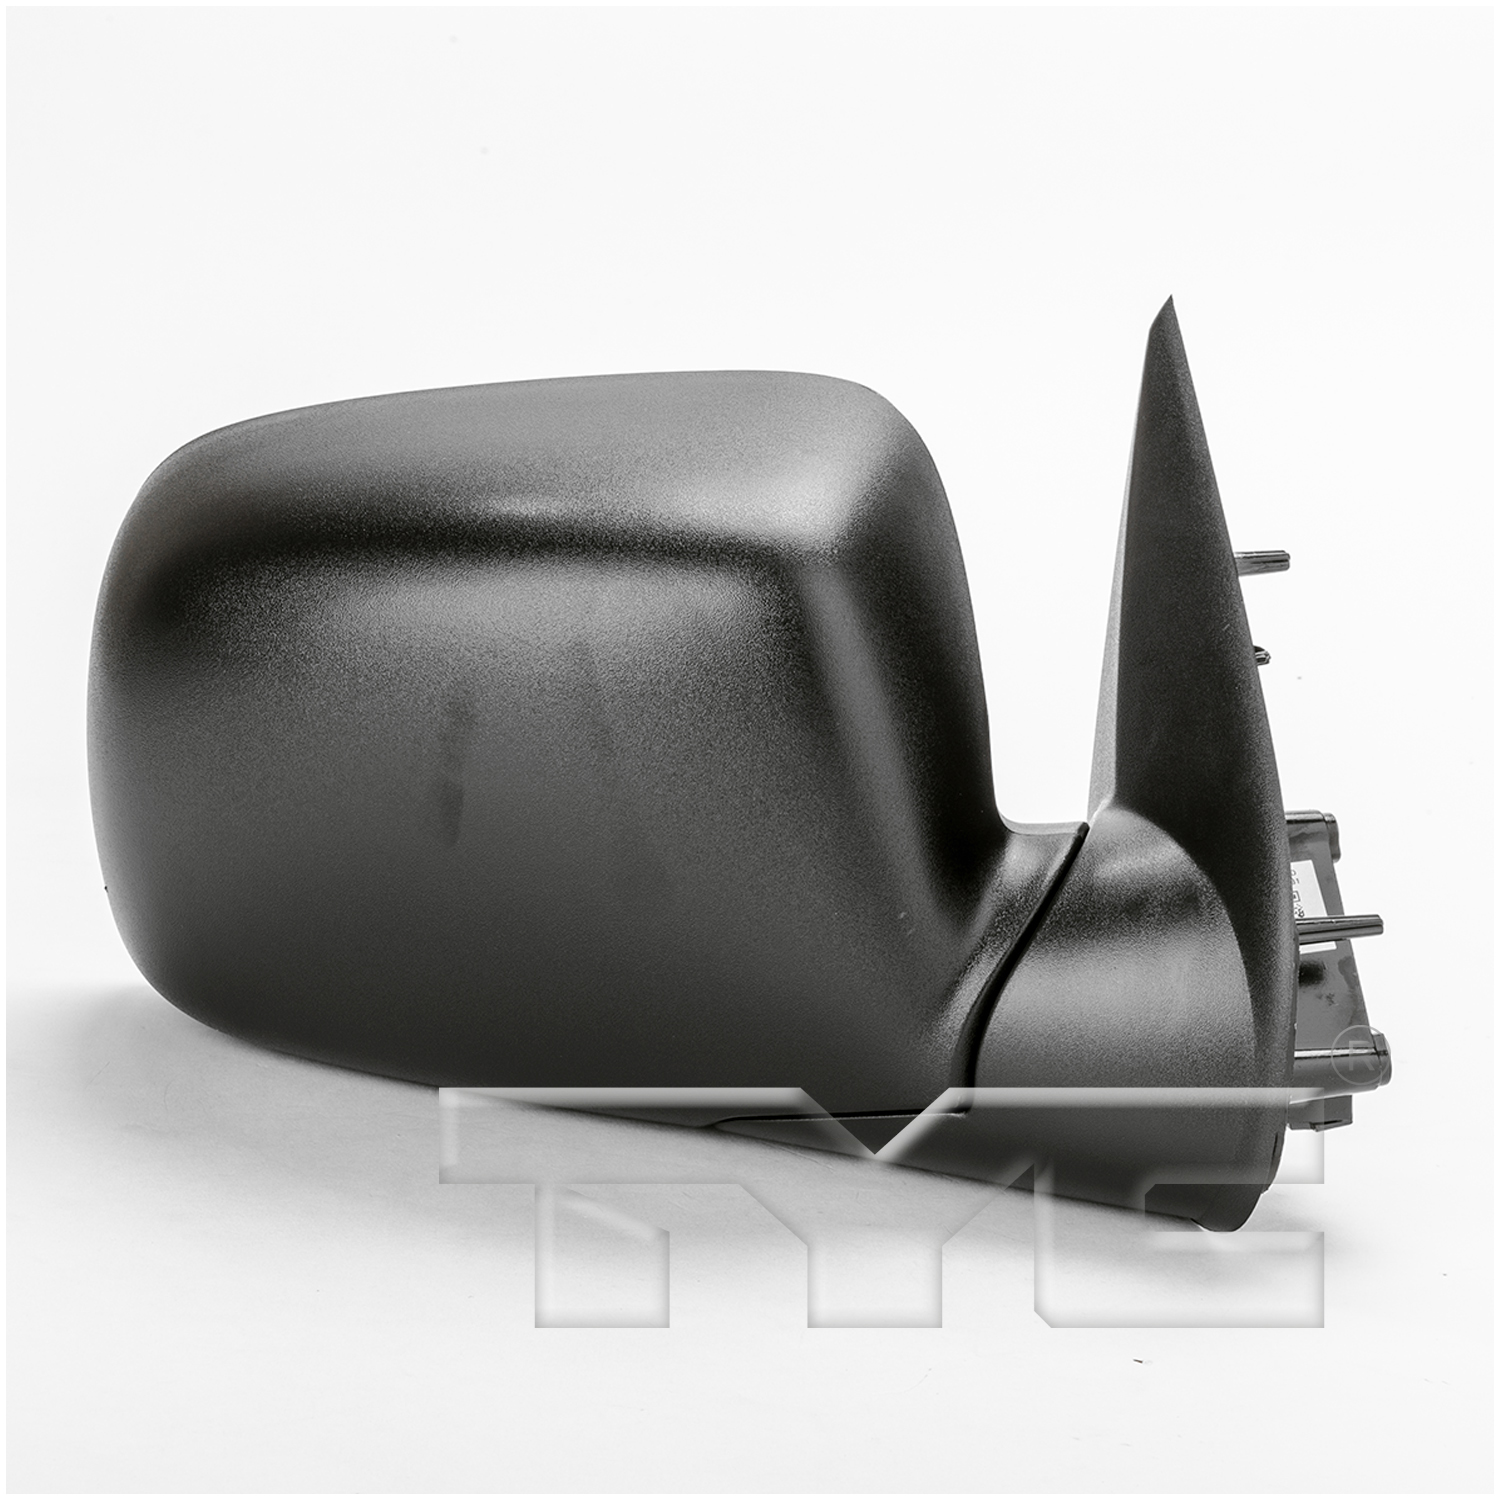 Aftermarket MIRRORS for GMC - CANYON, CANYON,04-12,RT Mirror outside rear view